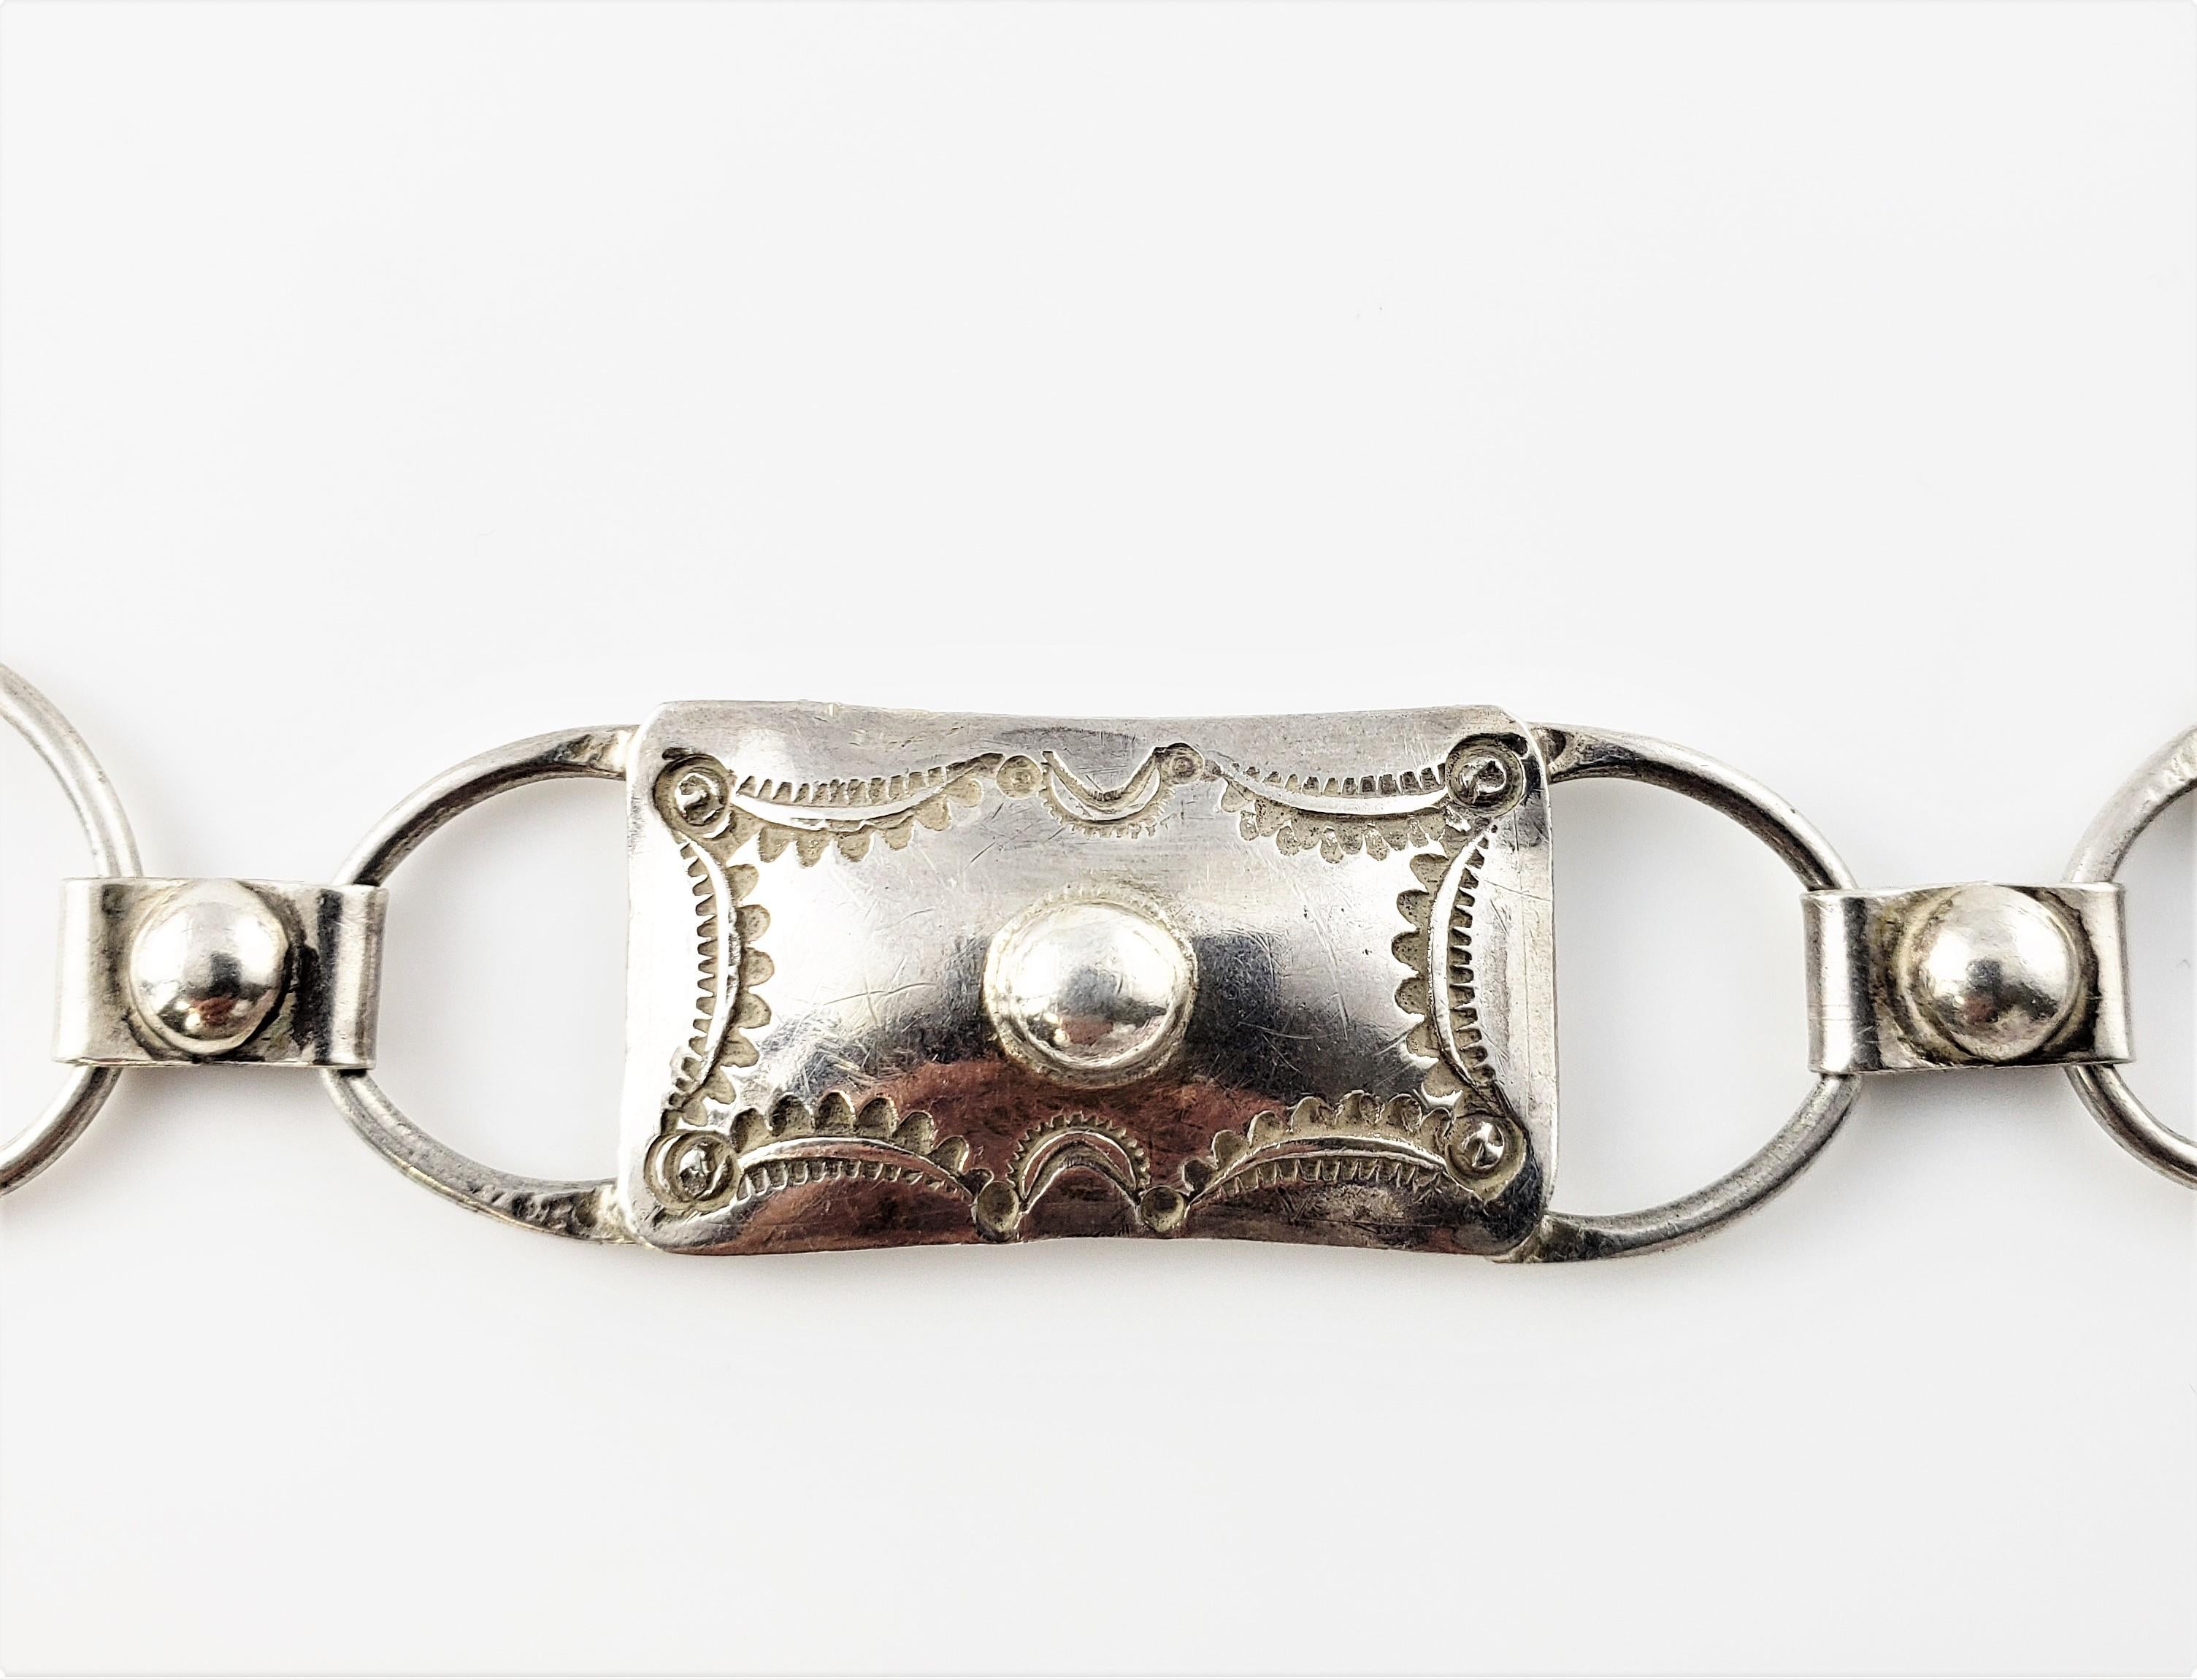 Vintage Native American Silver Rectangle Concho Belt-

This lovely Native American Concho belt is crafted in beautifully detailed silver.

Size: 30.5 inches x .75 inch

Weight: 52.9 dwt. / 82.3 gr.

Silver purity unknown.